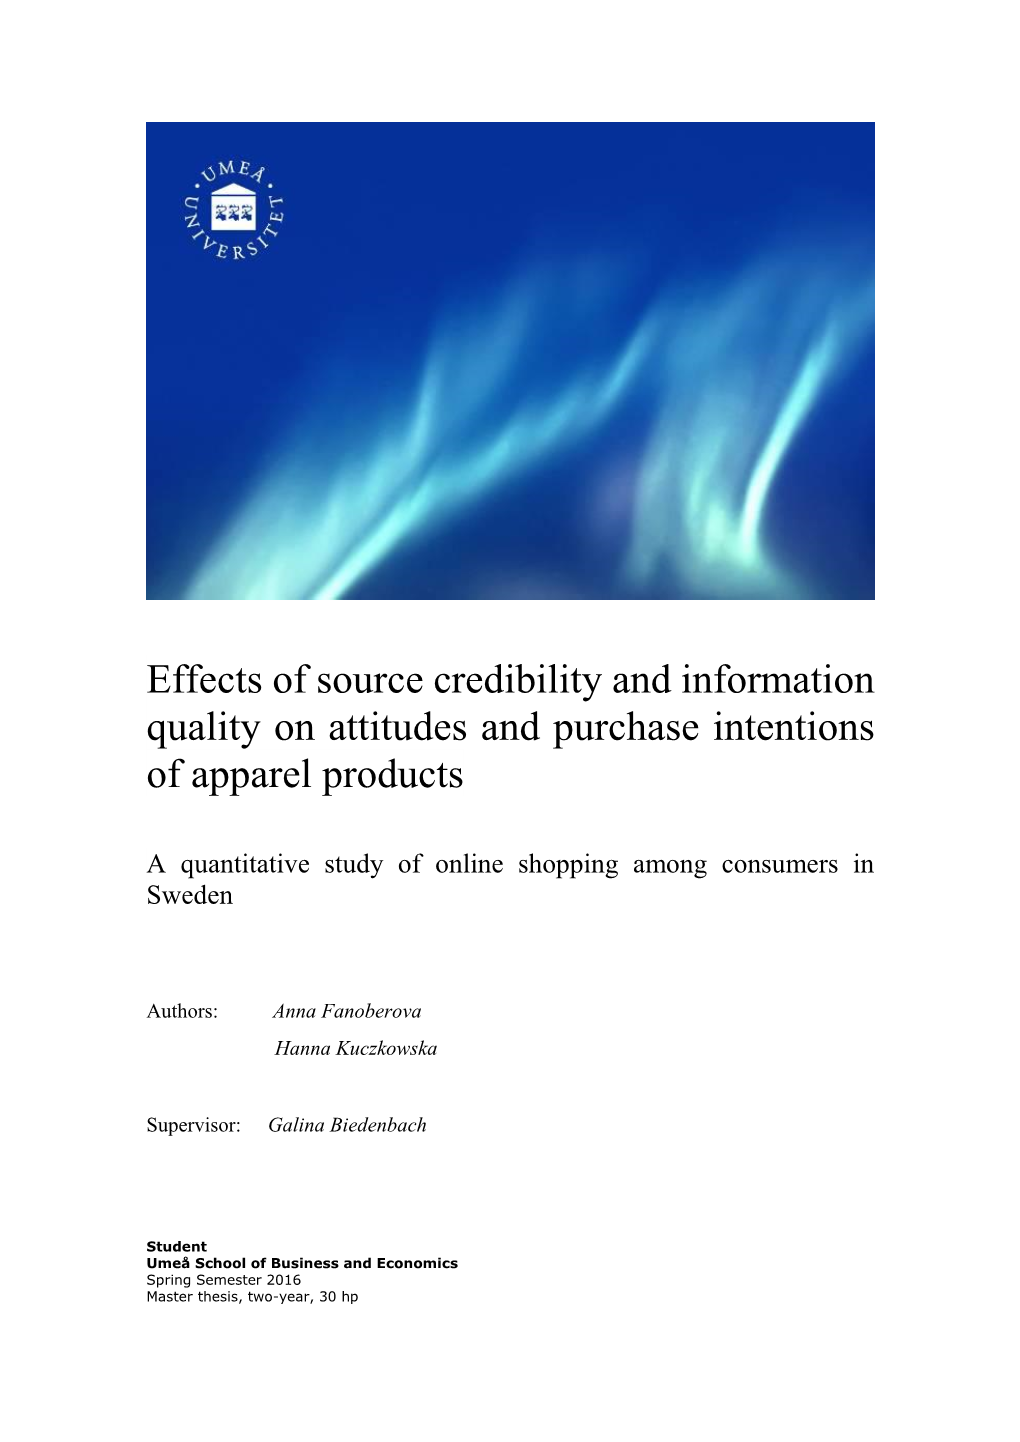 Effects of Source Credibility and Information Quality on Attitudes and Purchase Intentions of Apparel Products